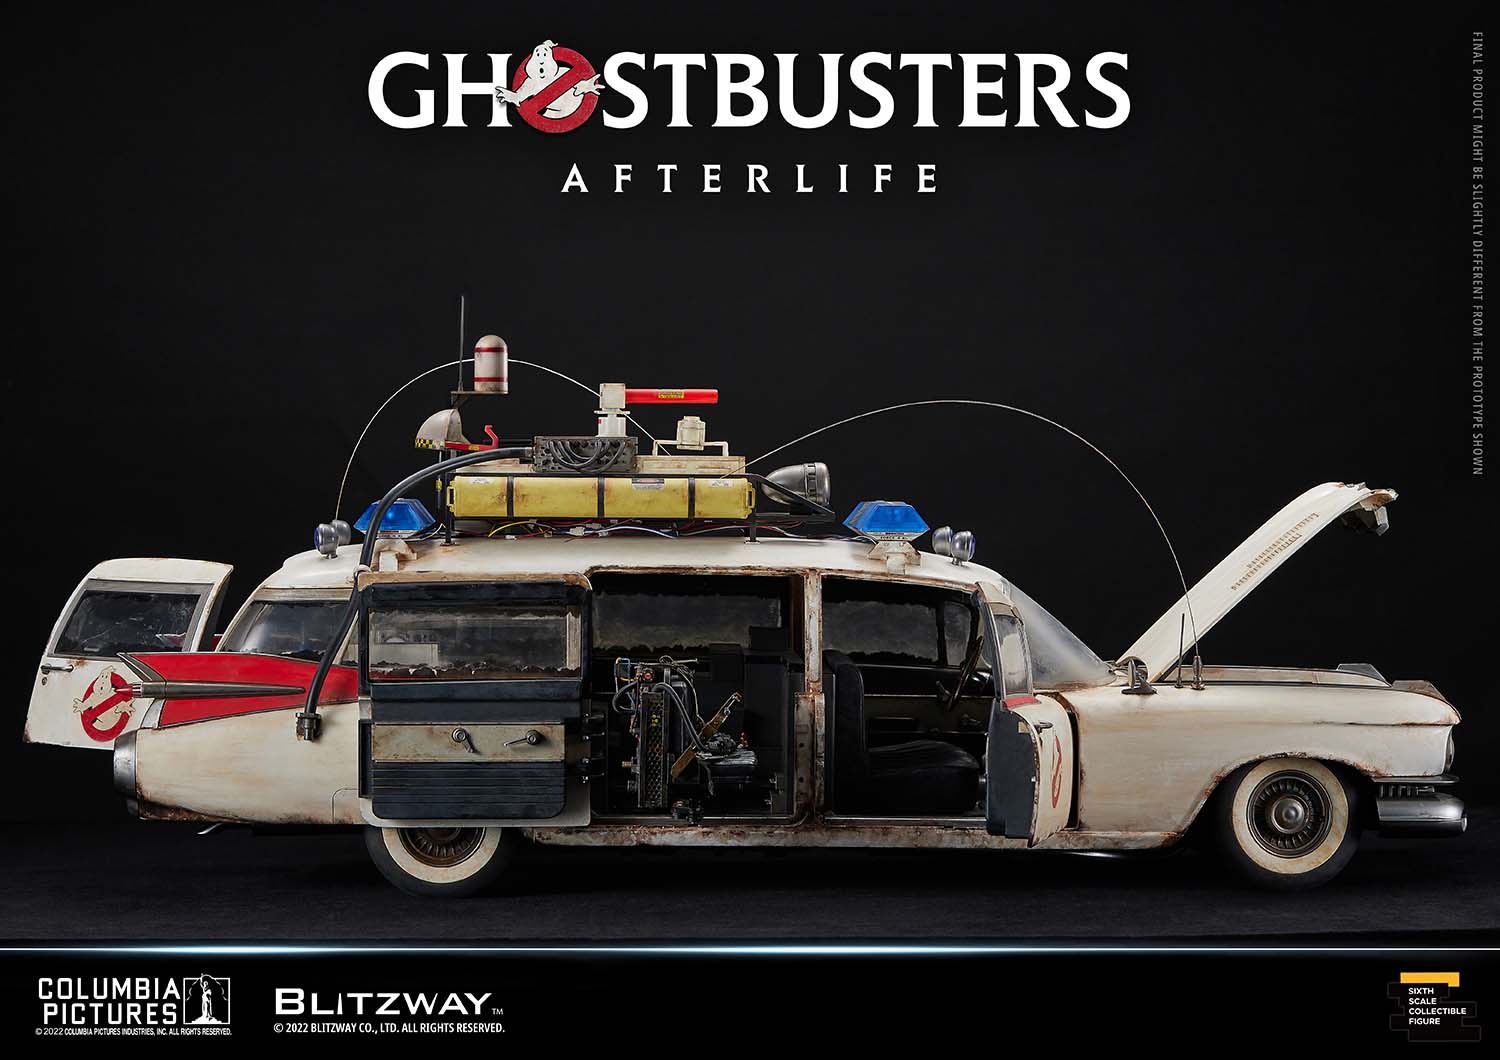 Ecto-1 (1:6 Scale Vehicle)- Ghostbusters: Afterlife